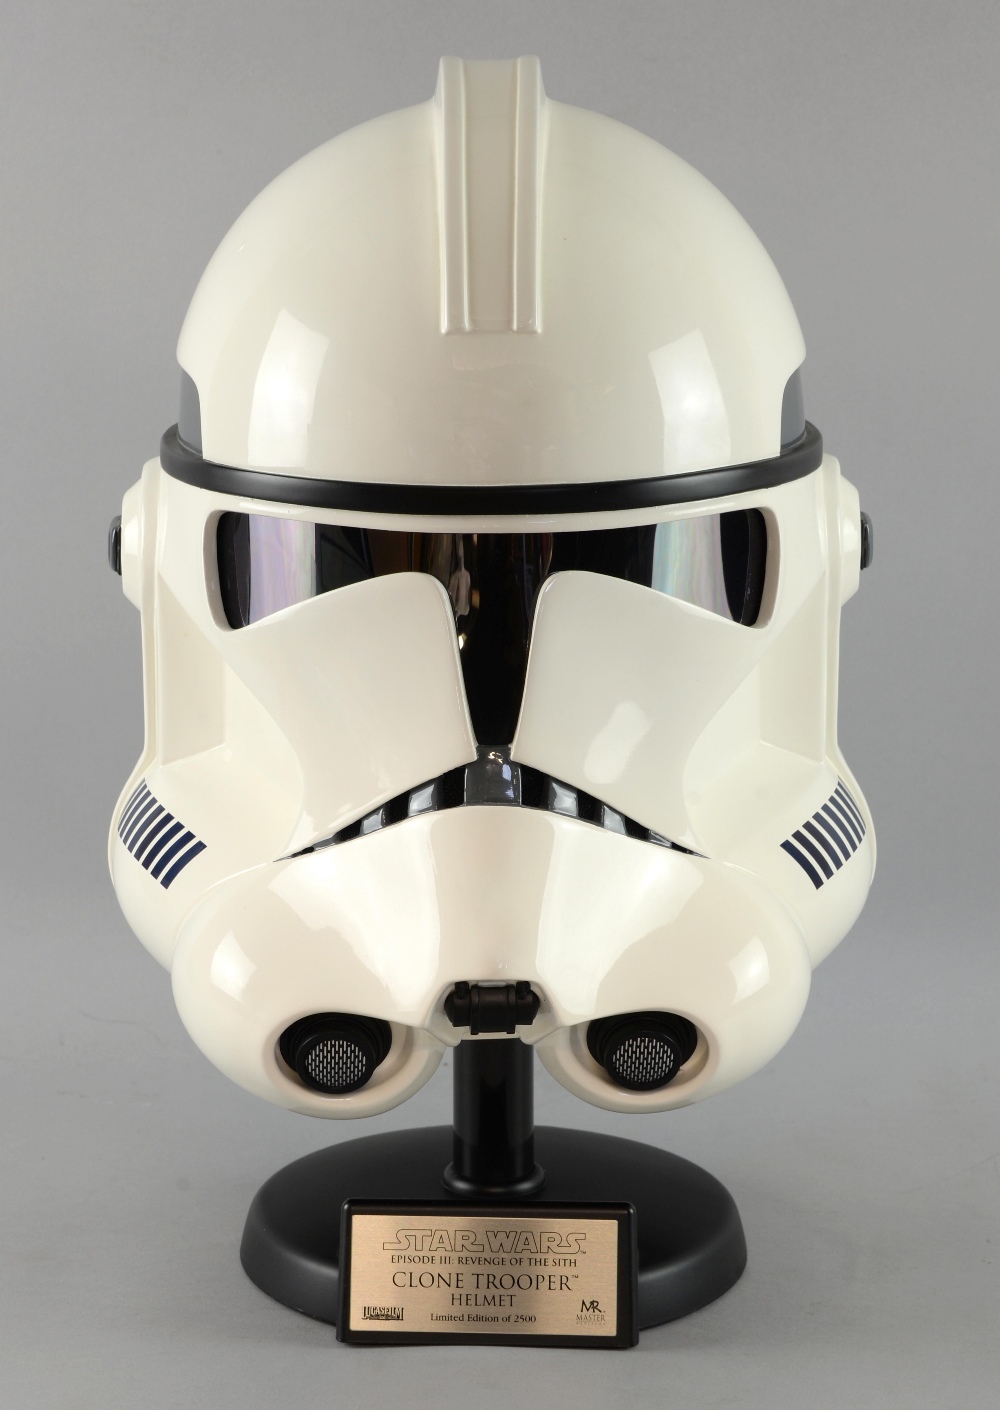 Star Wars - Master Replicas Episode III; Revenge of the Sith Clone Trooper Helmet, Limited Edition - Image 6 of 6